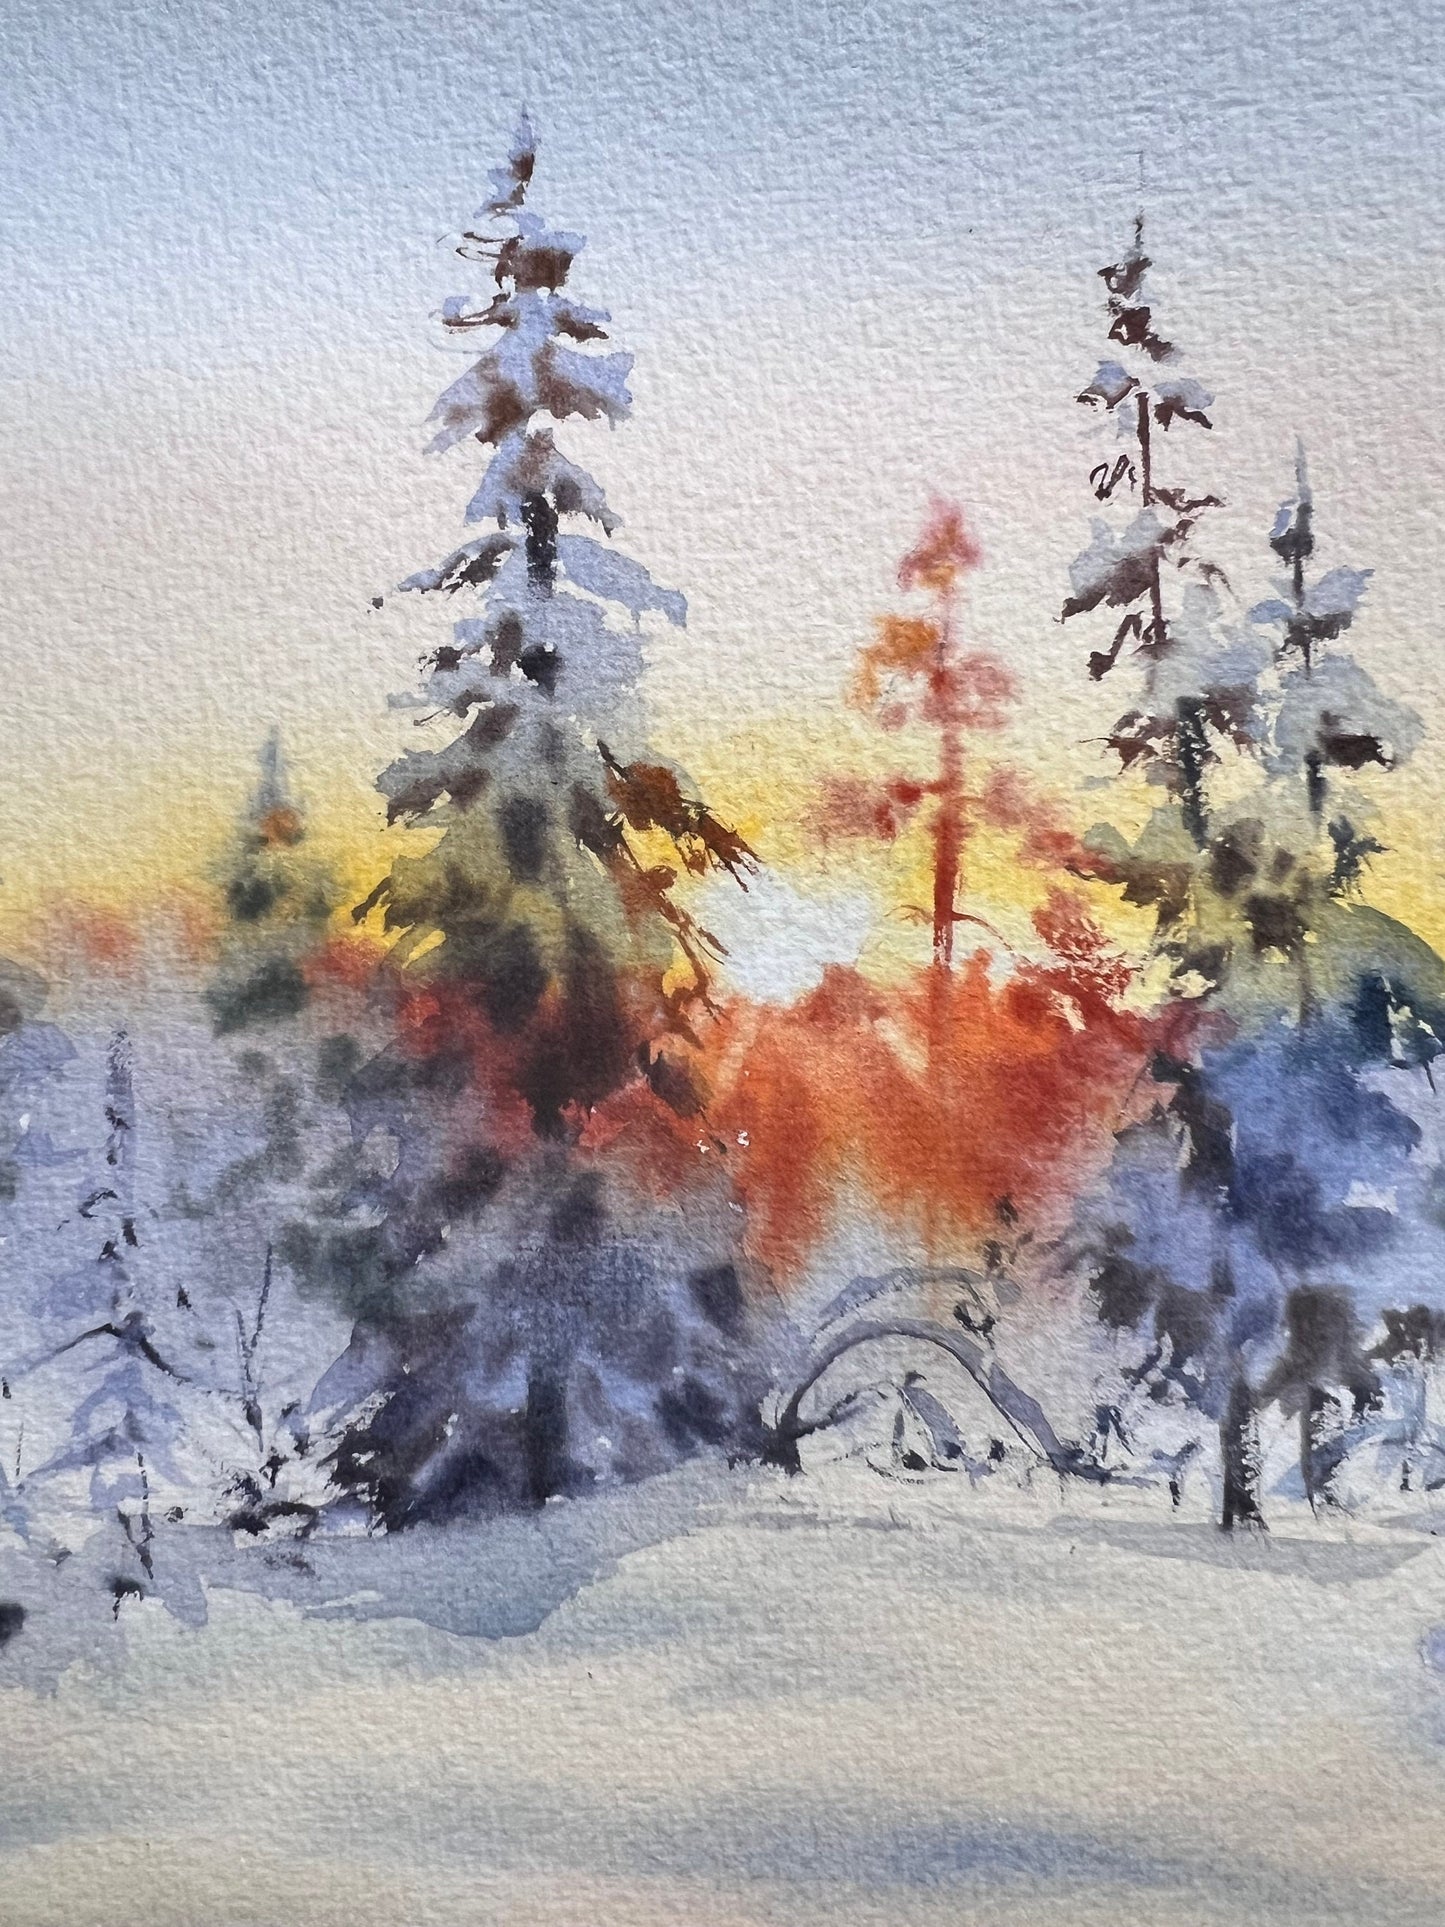 Winter Forest Small Painting, Christmas Tree Watercolor Original Artwork, New Year Gift & Art Decor, Snowy Landscape